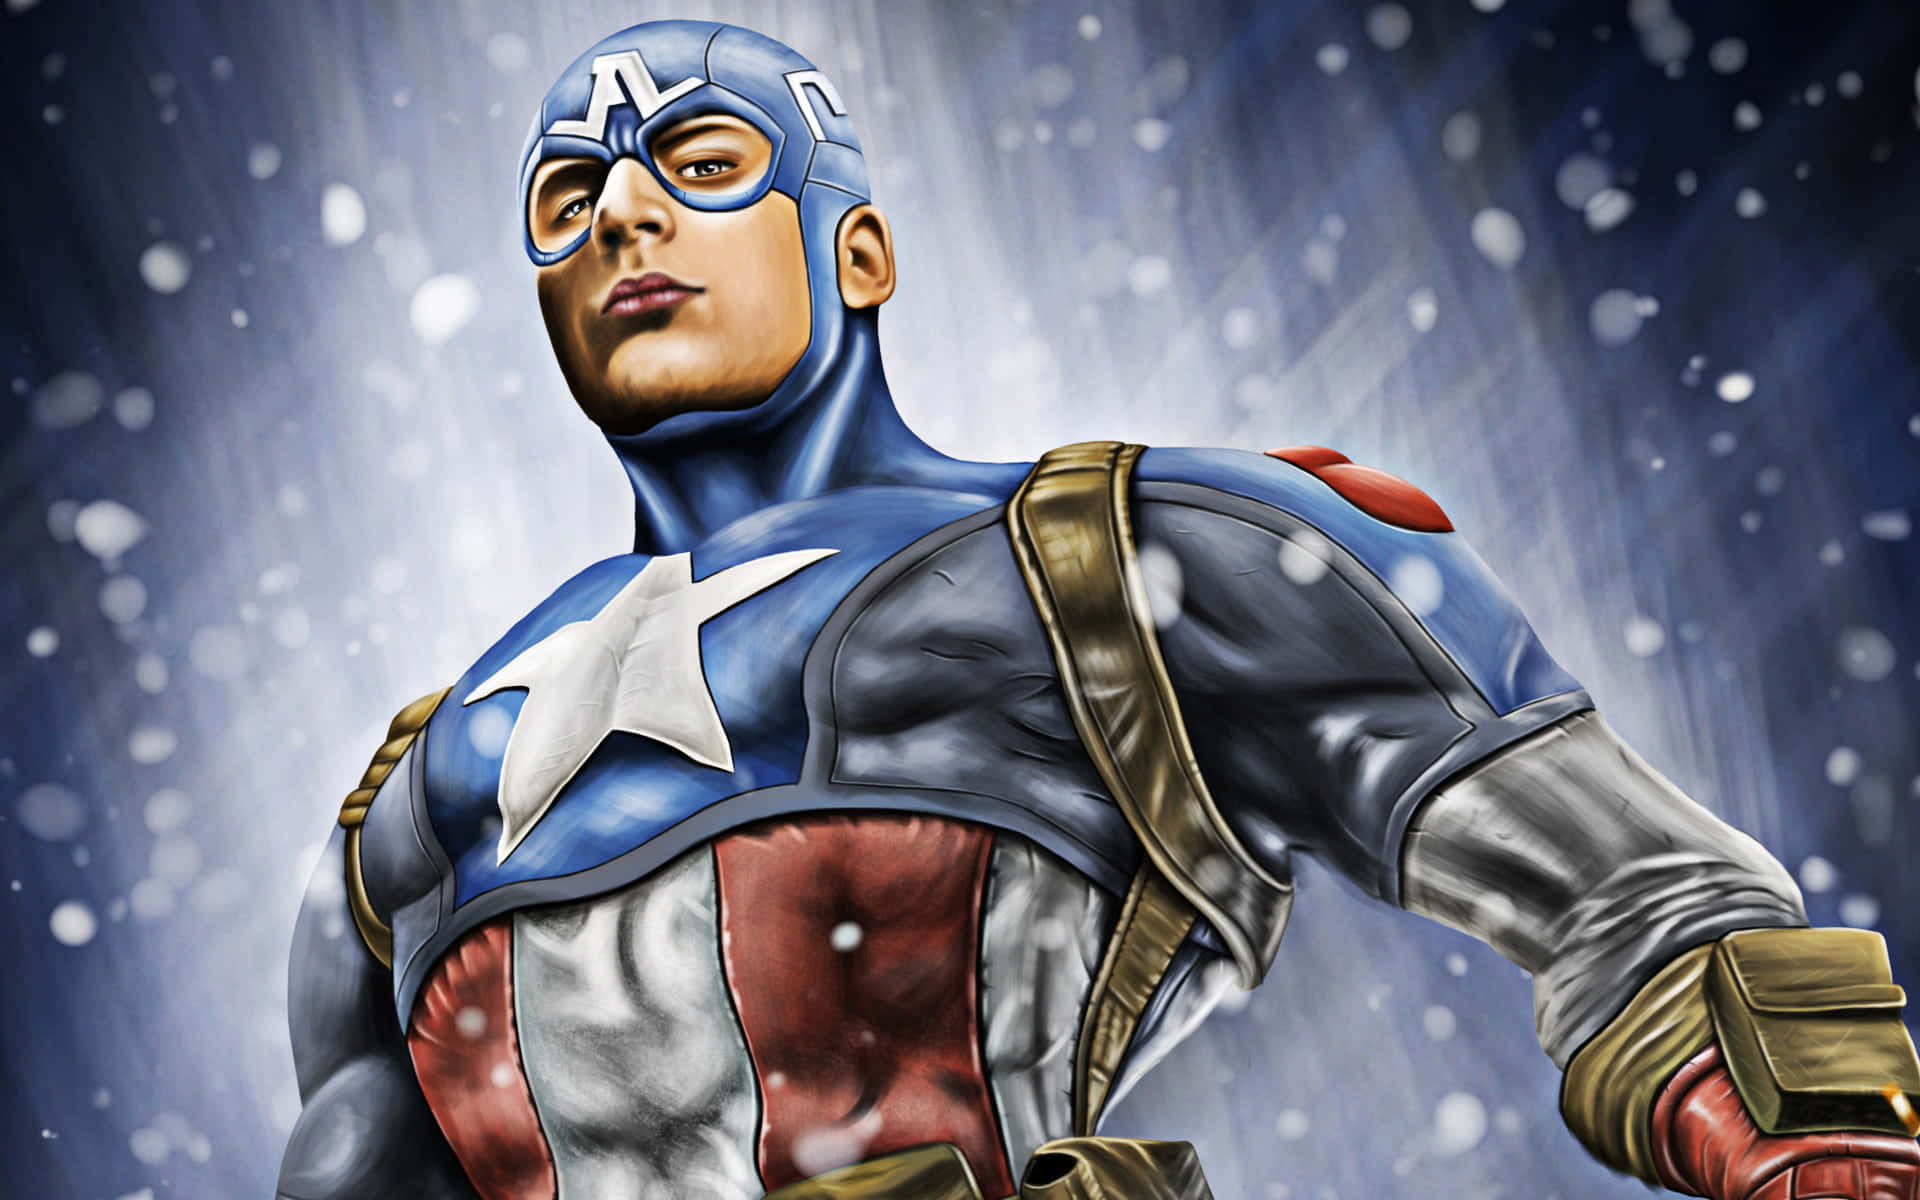 Retro Captain America stays true to his lifelong mission of protecting freedom Wallpaper